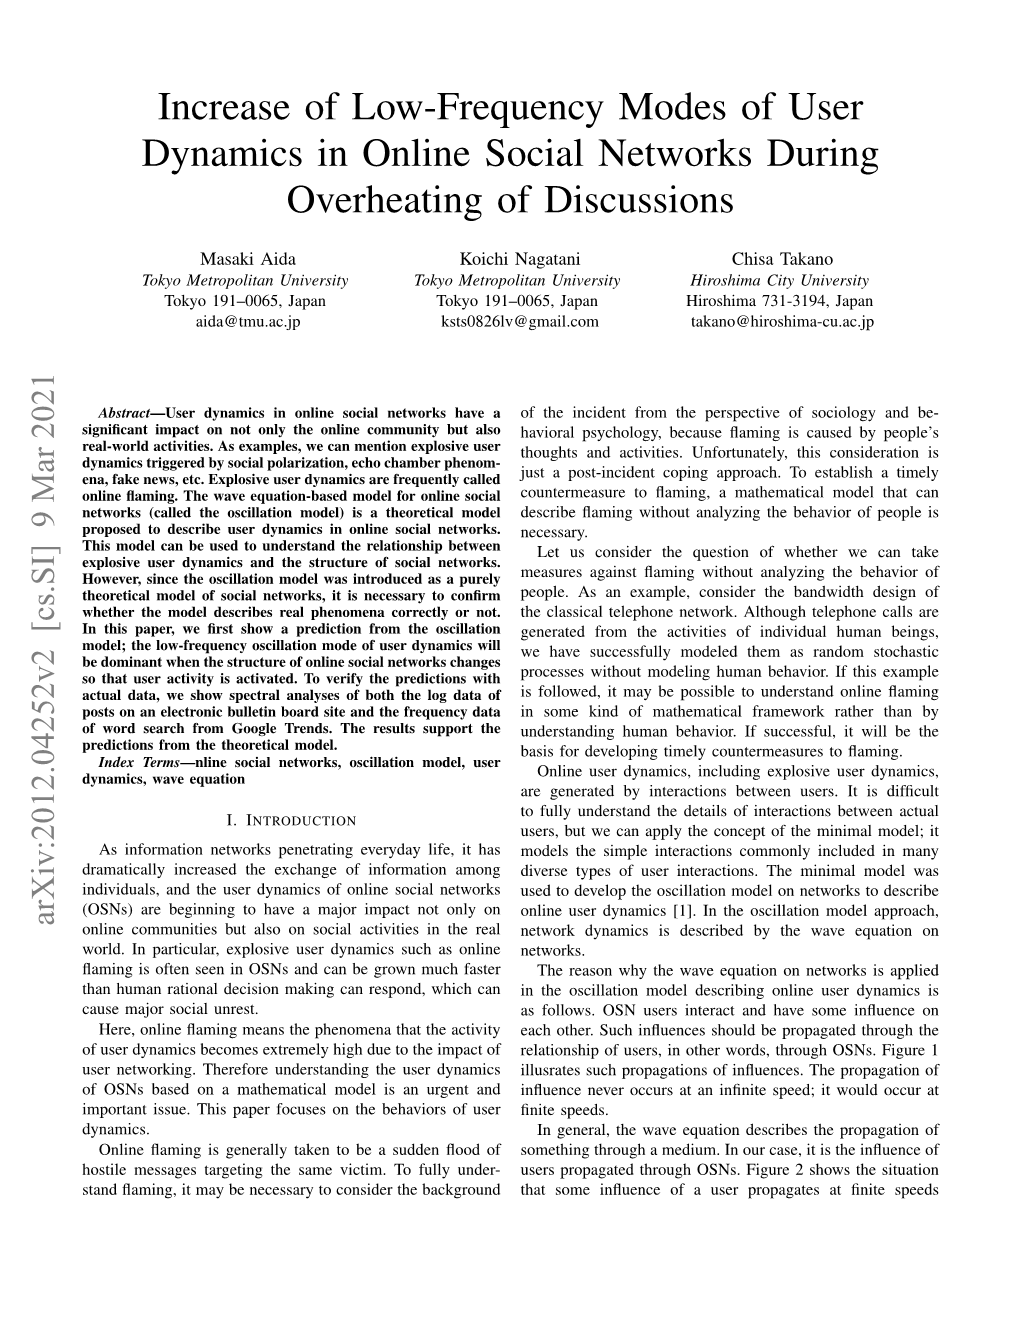 Increase of Low-Frequency Modes of User Dynamics in Online Social Networks During Overheating of Discussions